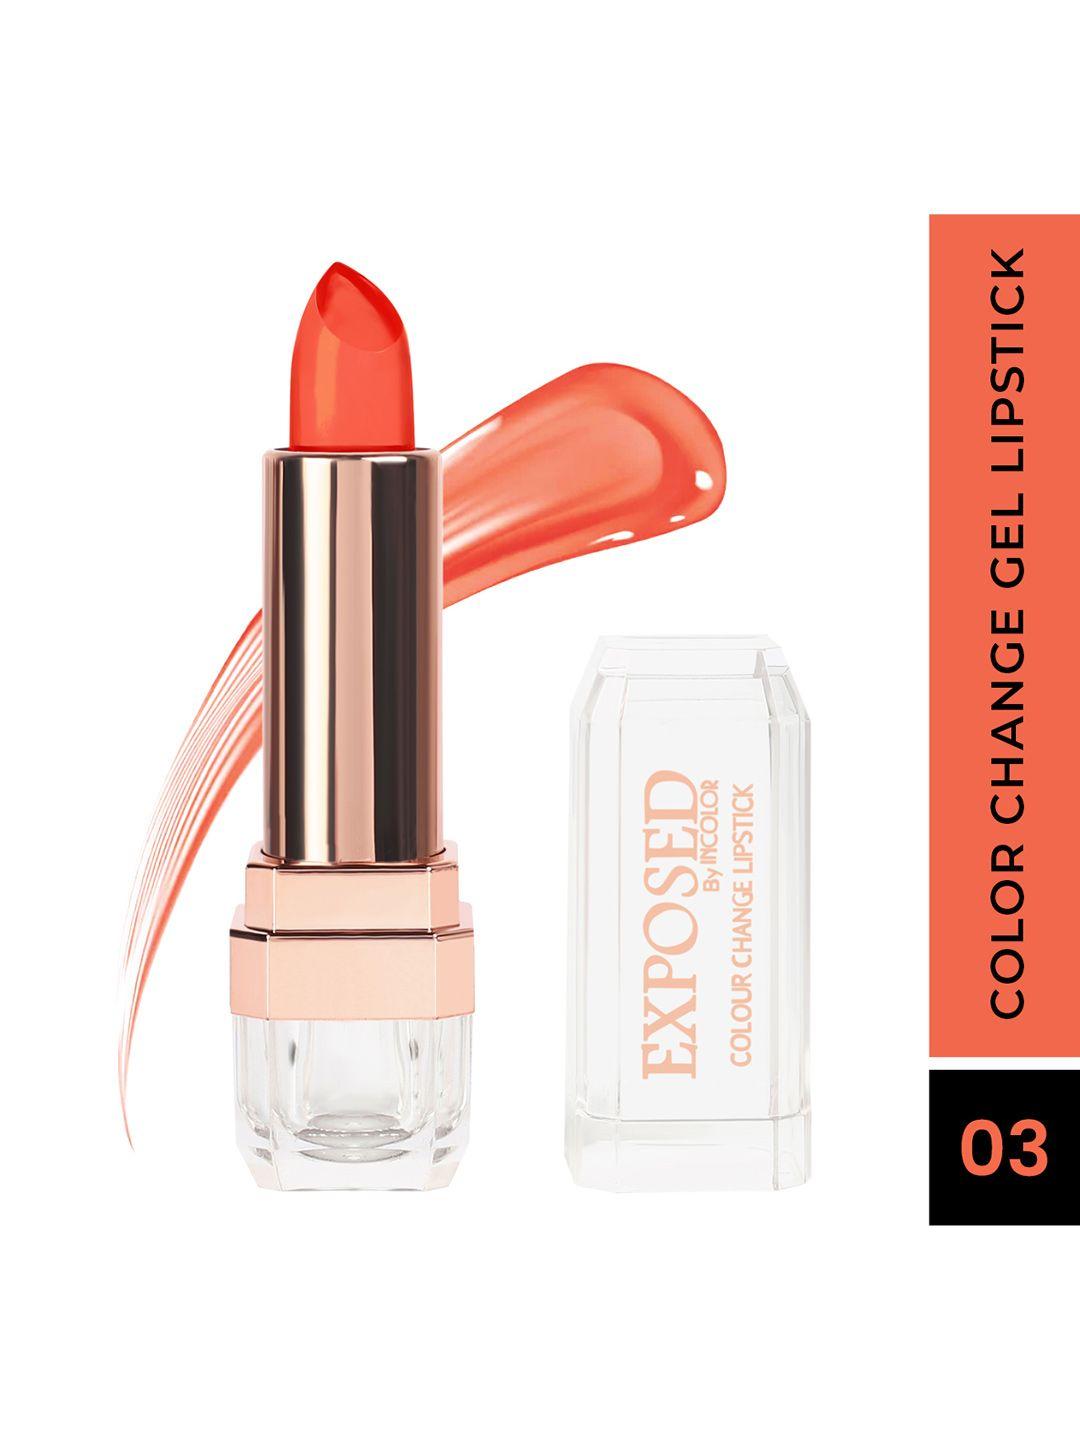 incolor exposed color change lipstick 03 3.7 g